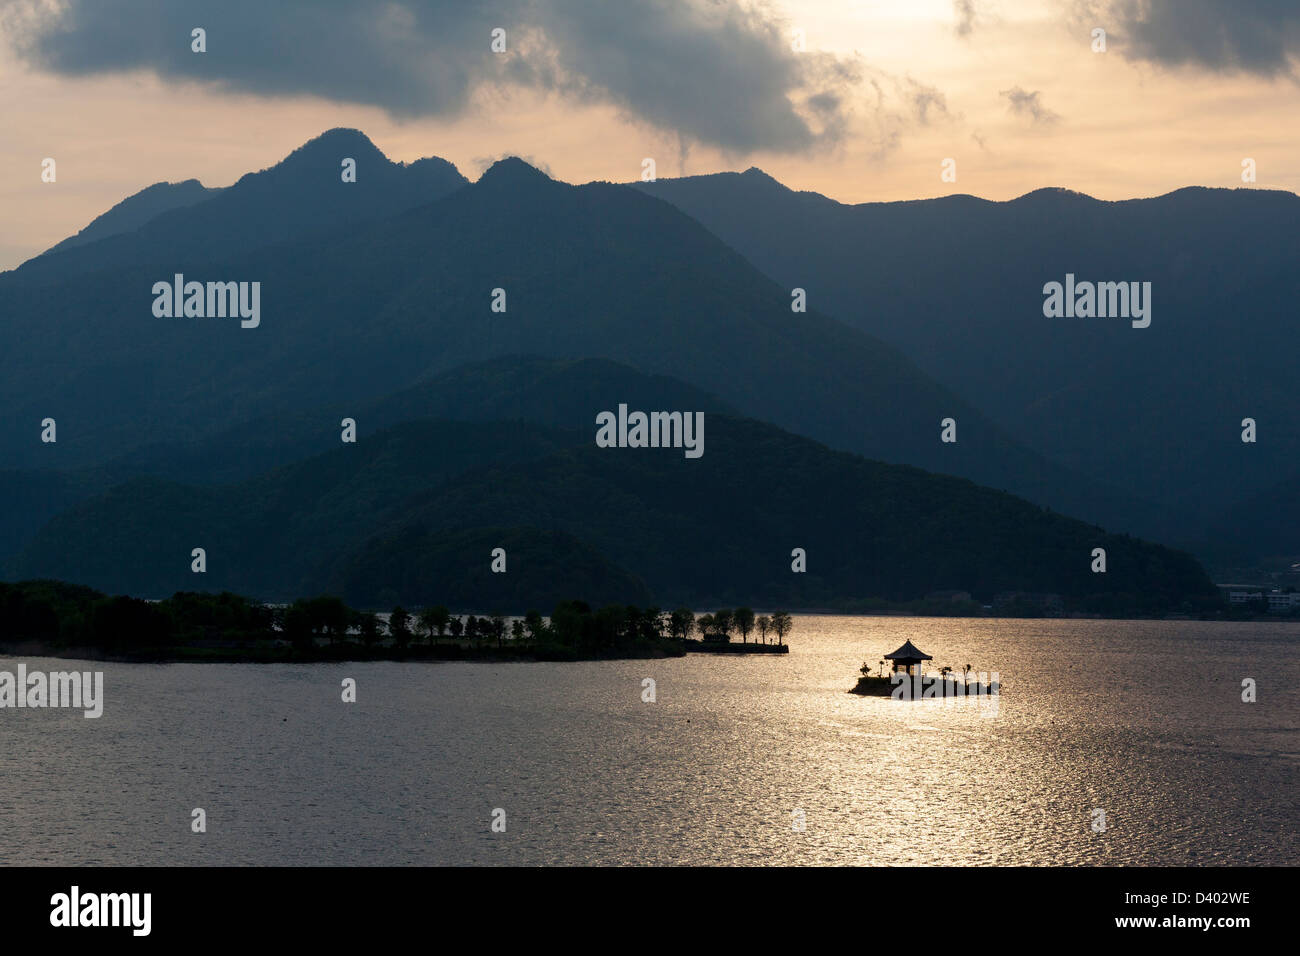 Sunset silhouette of the island shrine on lake Kawaguchi with mountains in the background. Stock Photo